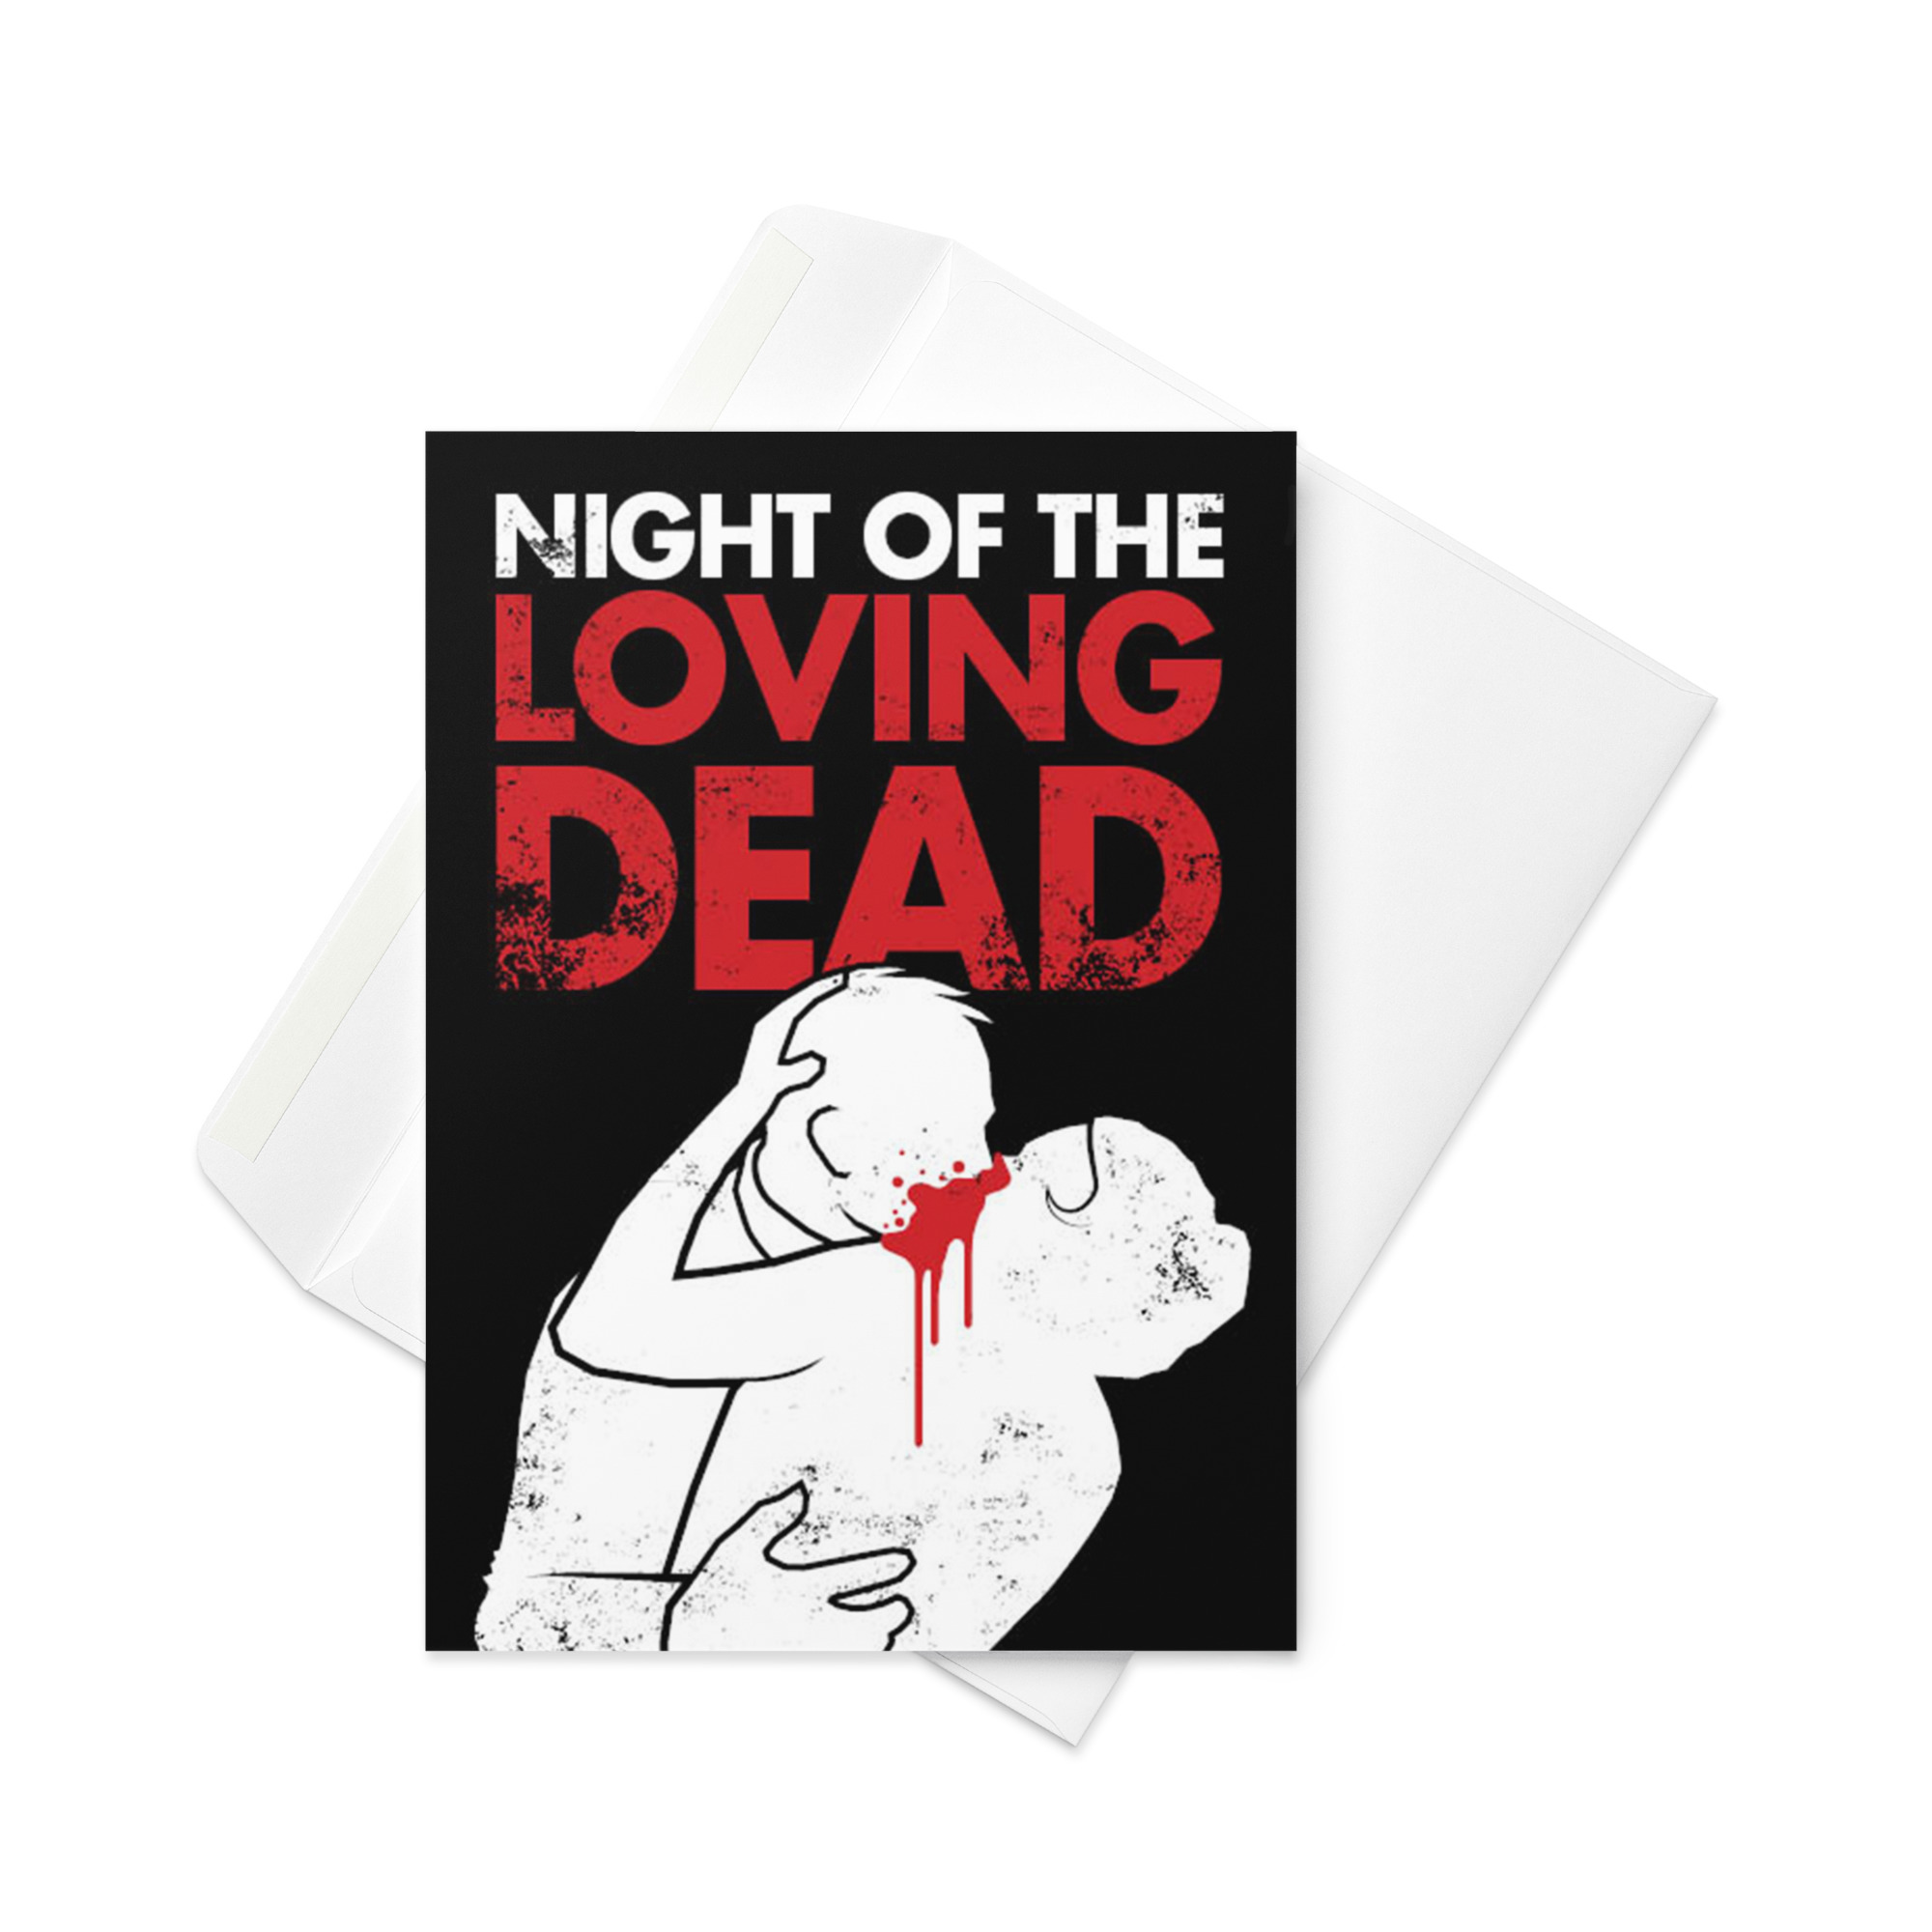 5 inch by 7 inch greetings card with two zombies embracing with the words 